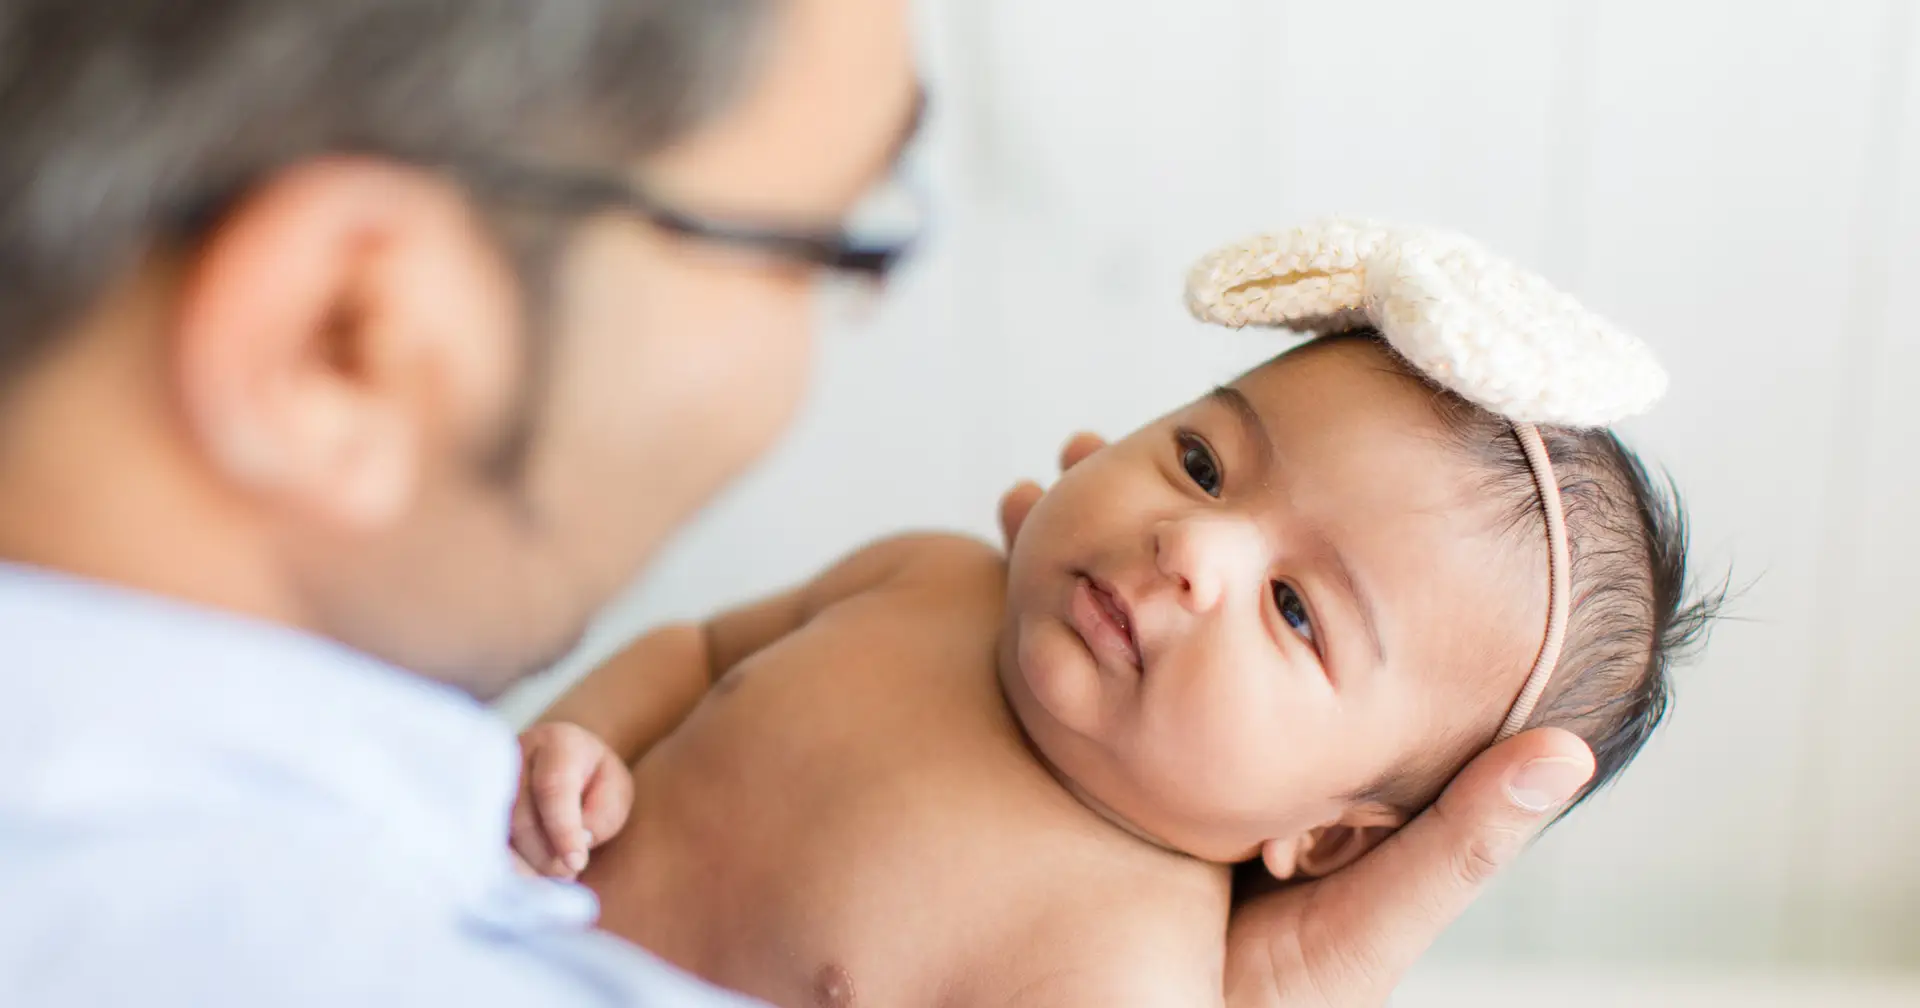 Newborn Care Specialist blurred in foreground holding baby with bow on its head.